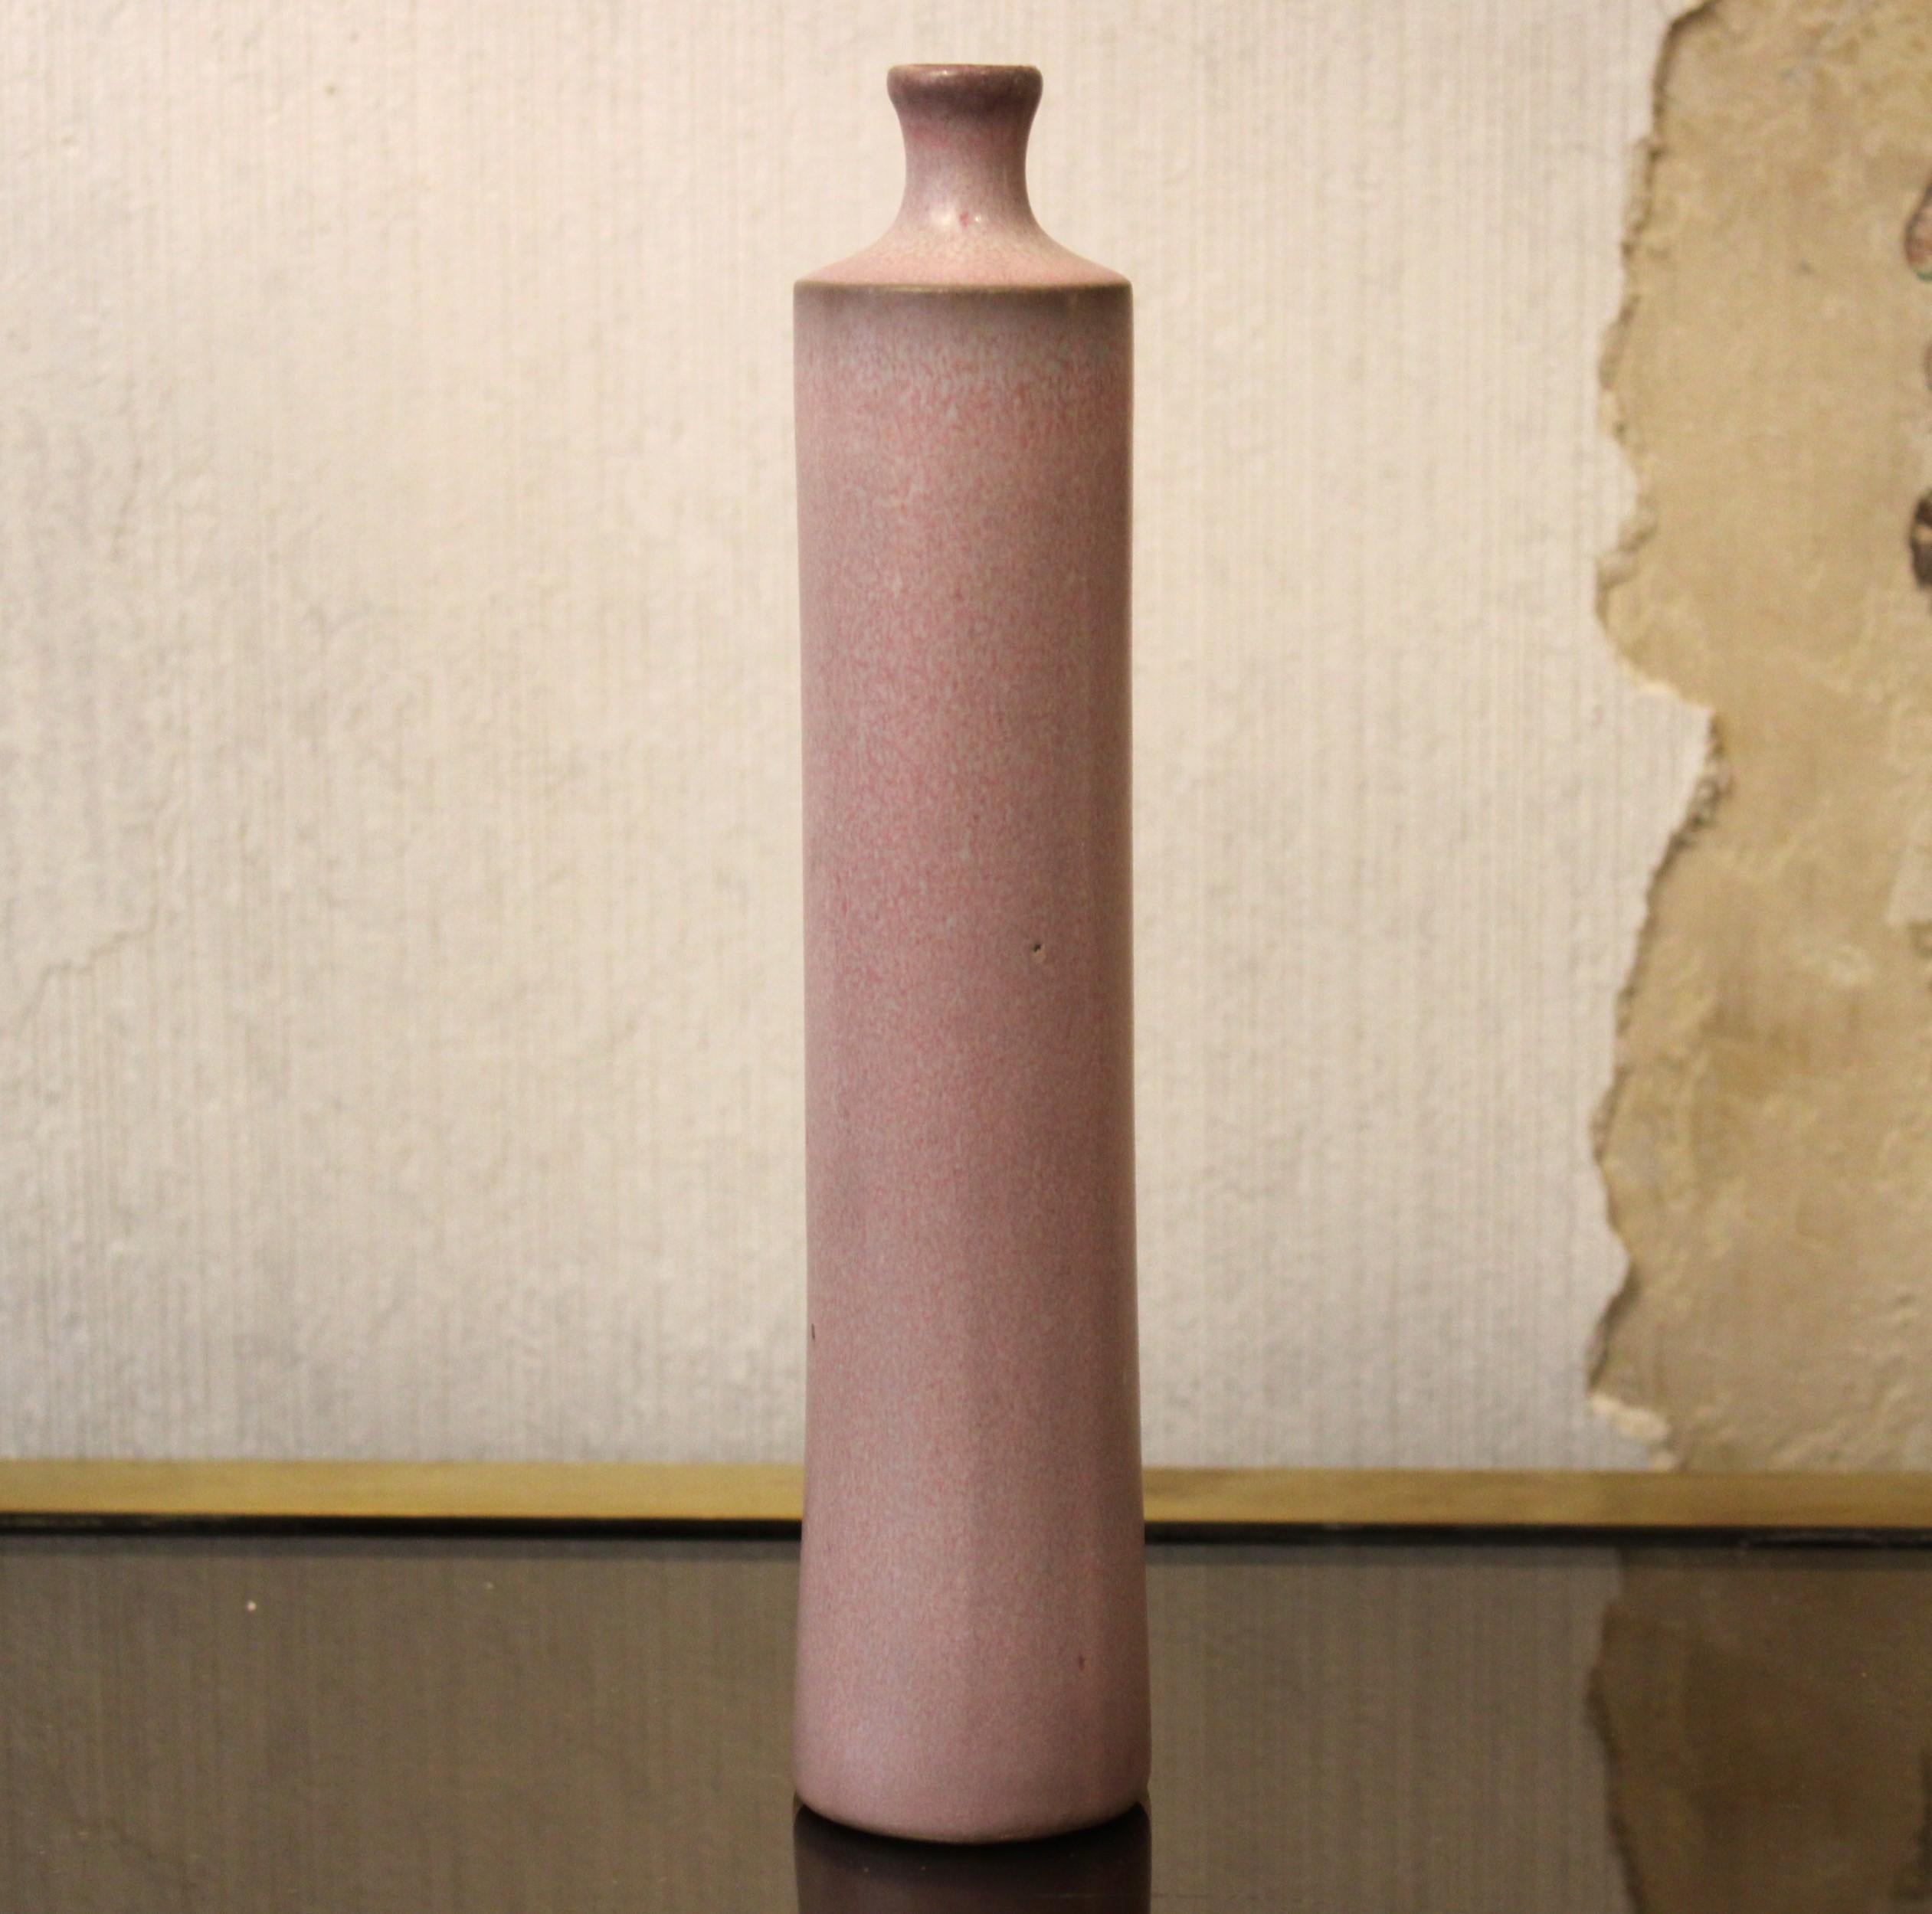 Ceramic bottle by Jacques (1926-2088) and Dani Ruelland (1933-2010).
Very light pink color
Signed Ruelland under the base.
France, circa 1960